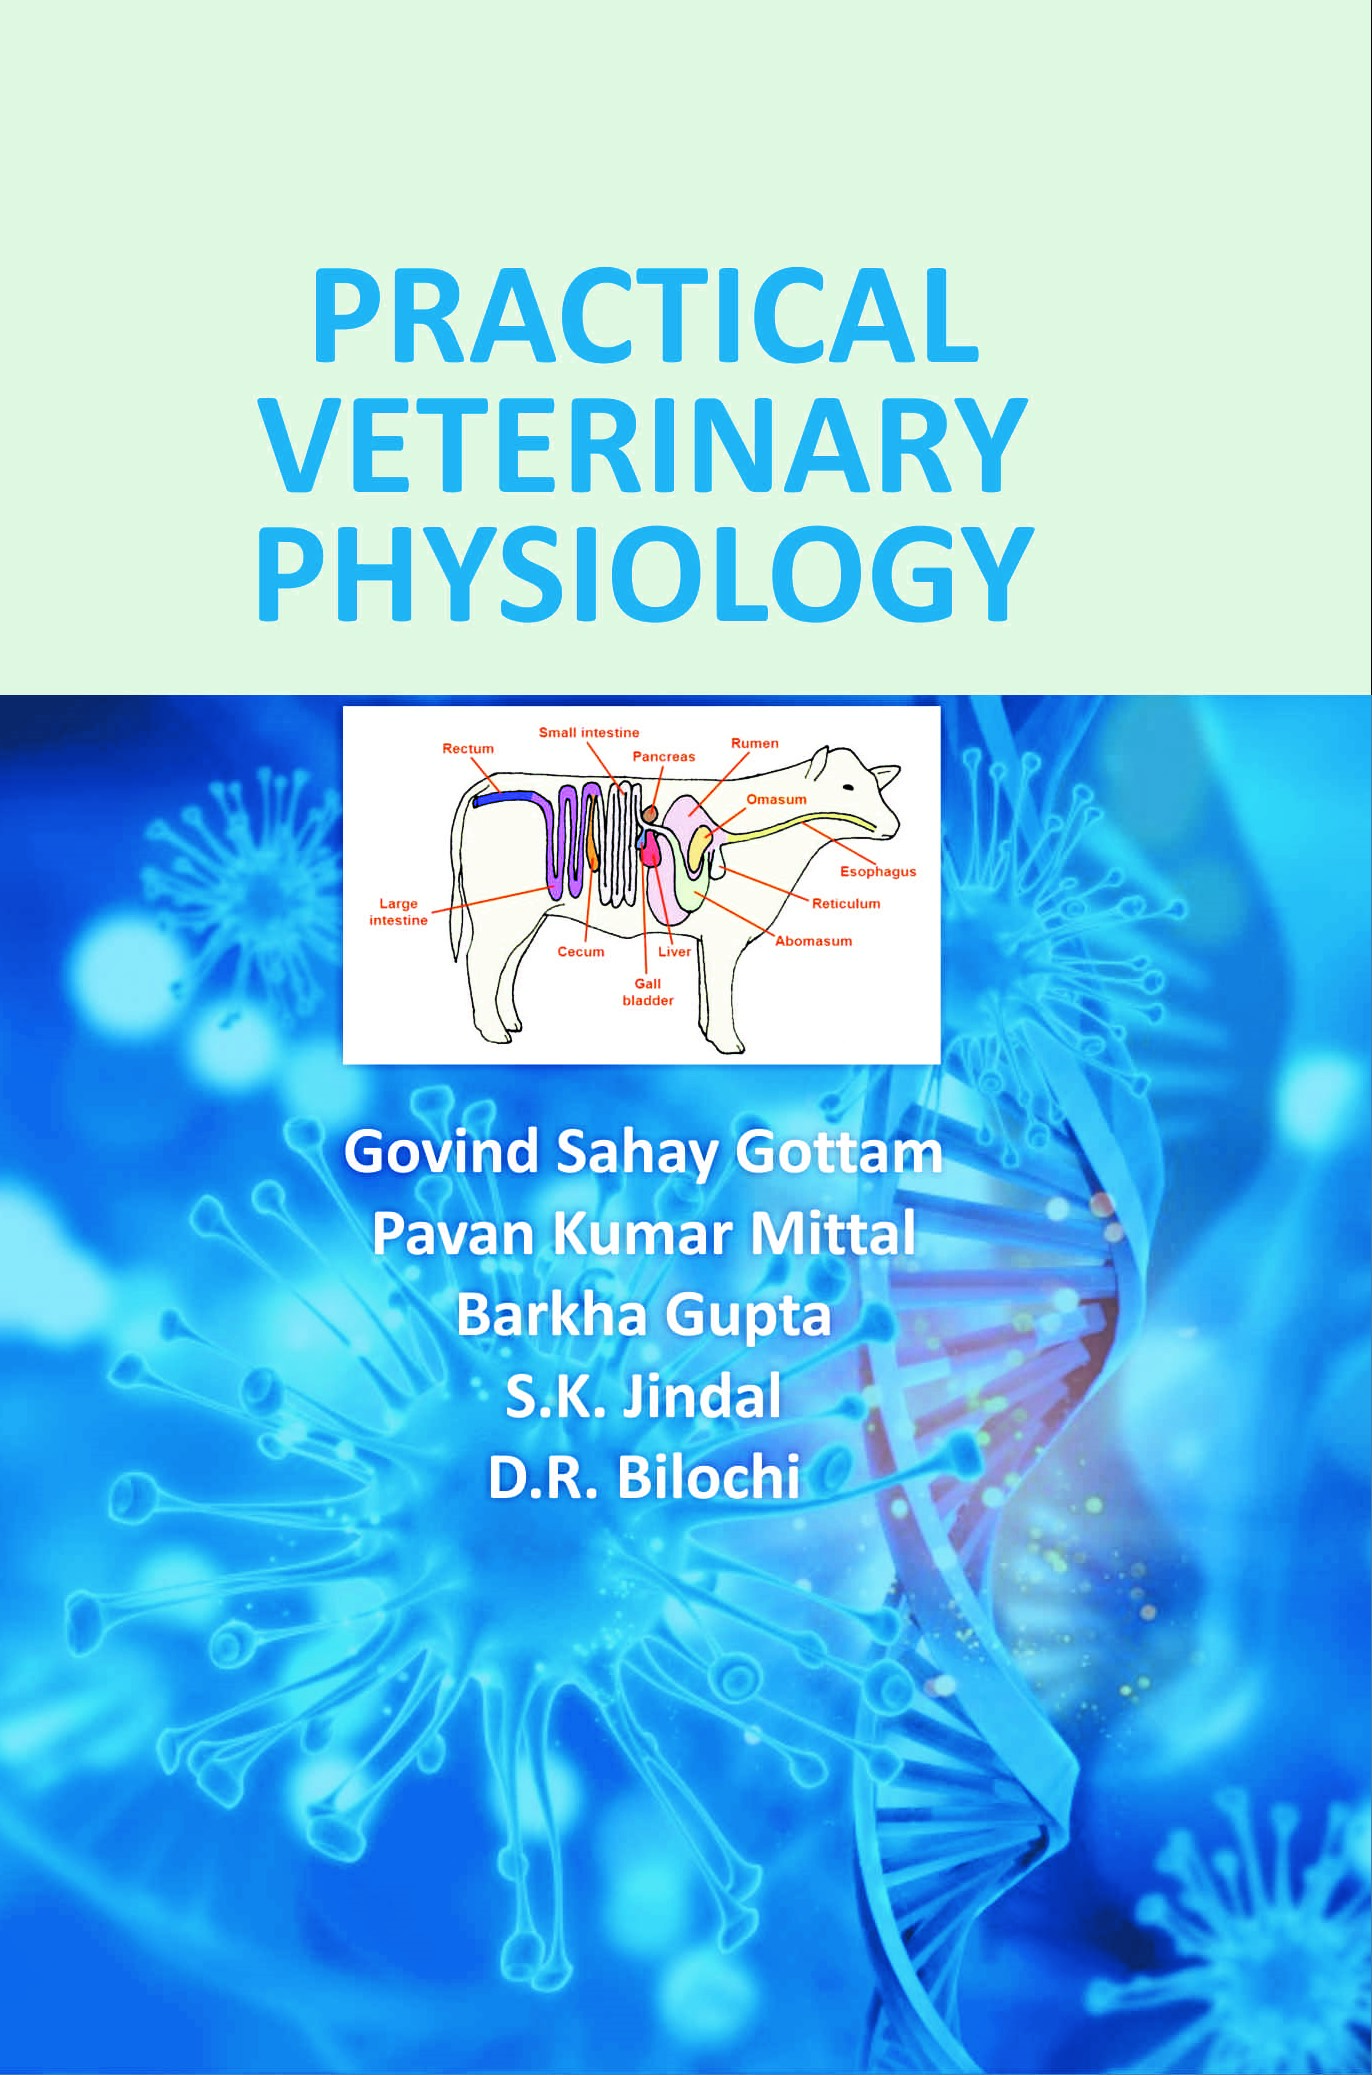 Practical Veterinary Physiology